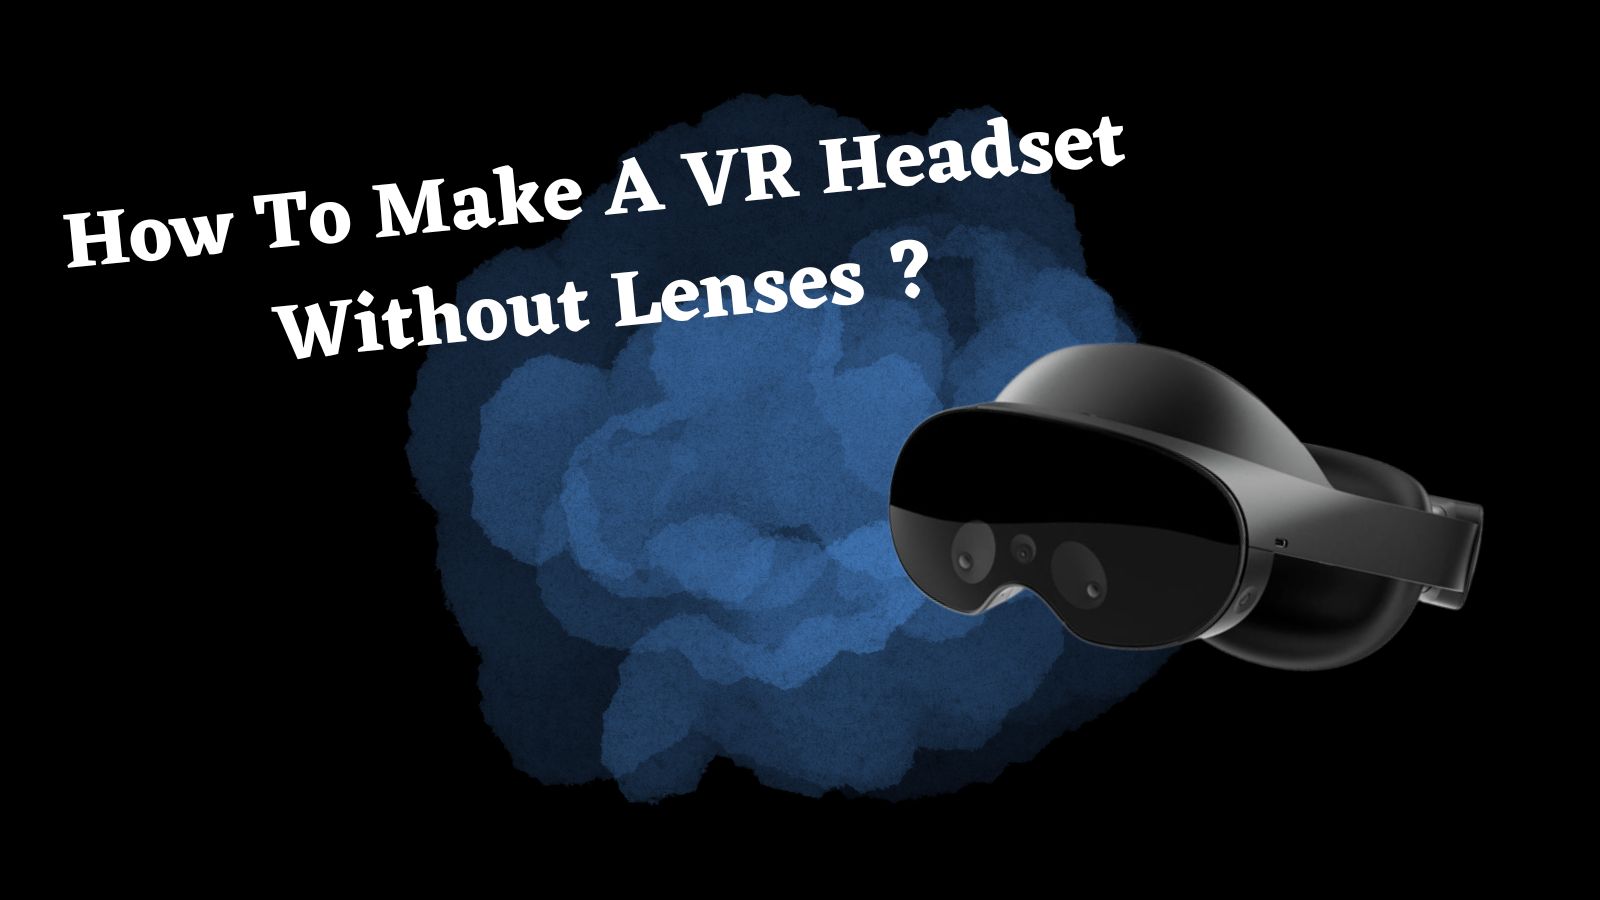 How to make a VR Headset without lenses